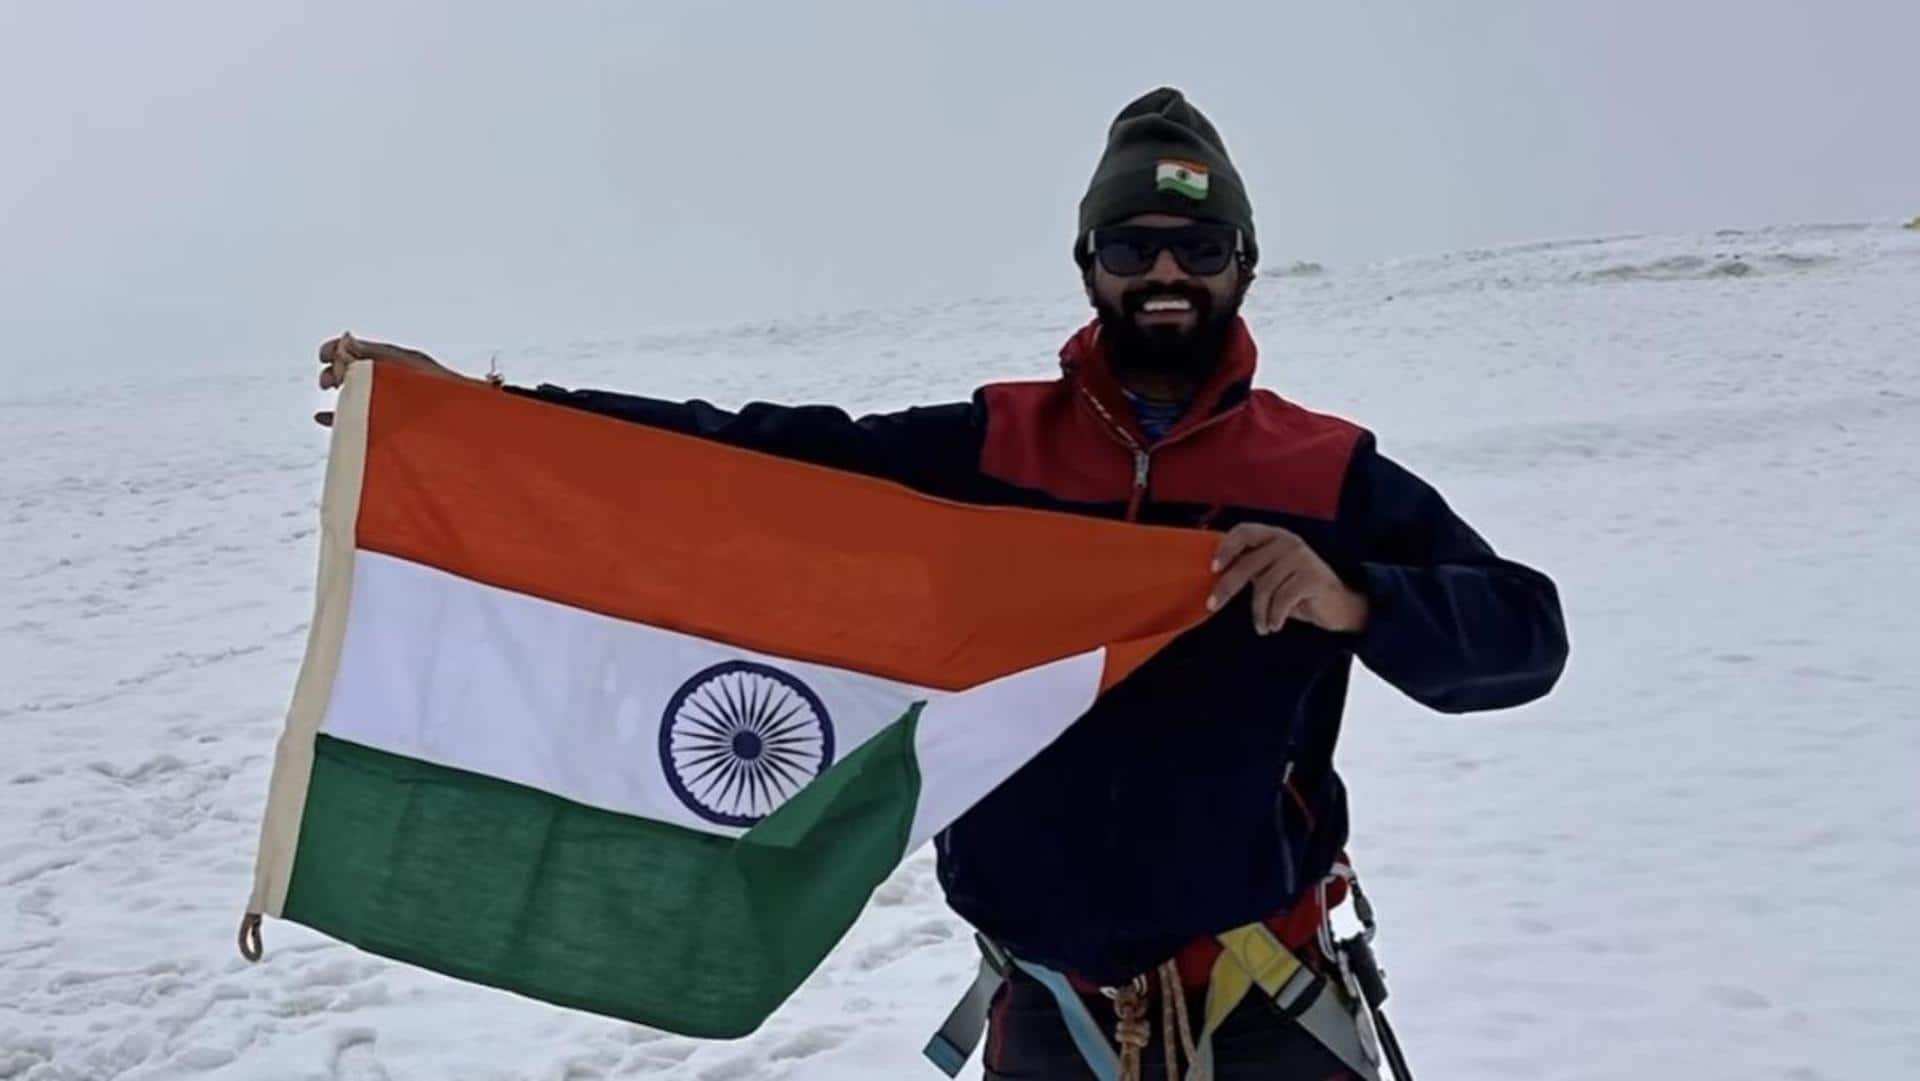 Indian climber Anurag Maloo, missing on Mount Annapurna, rescued alive